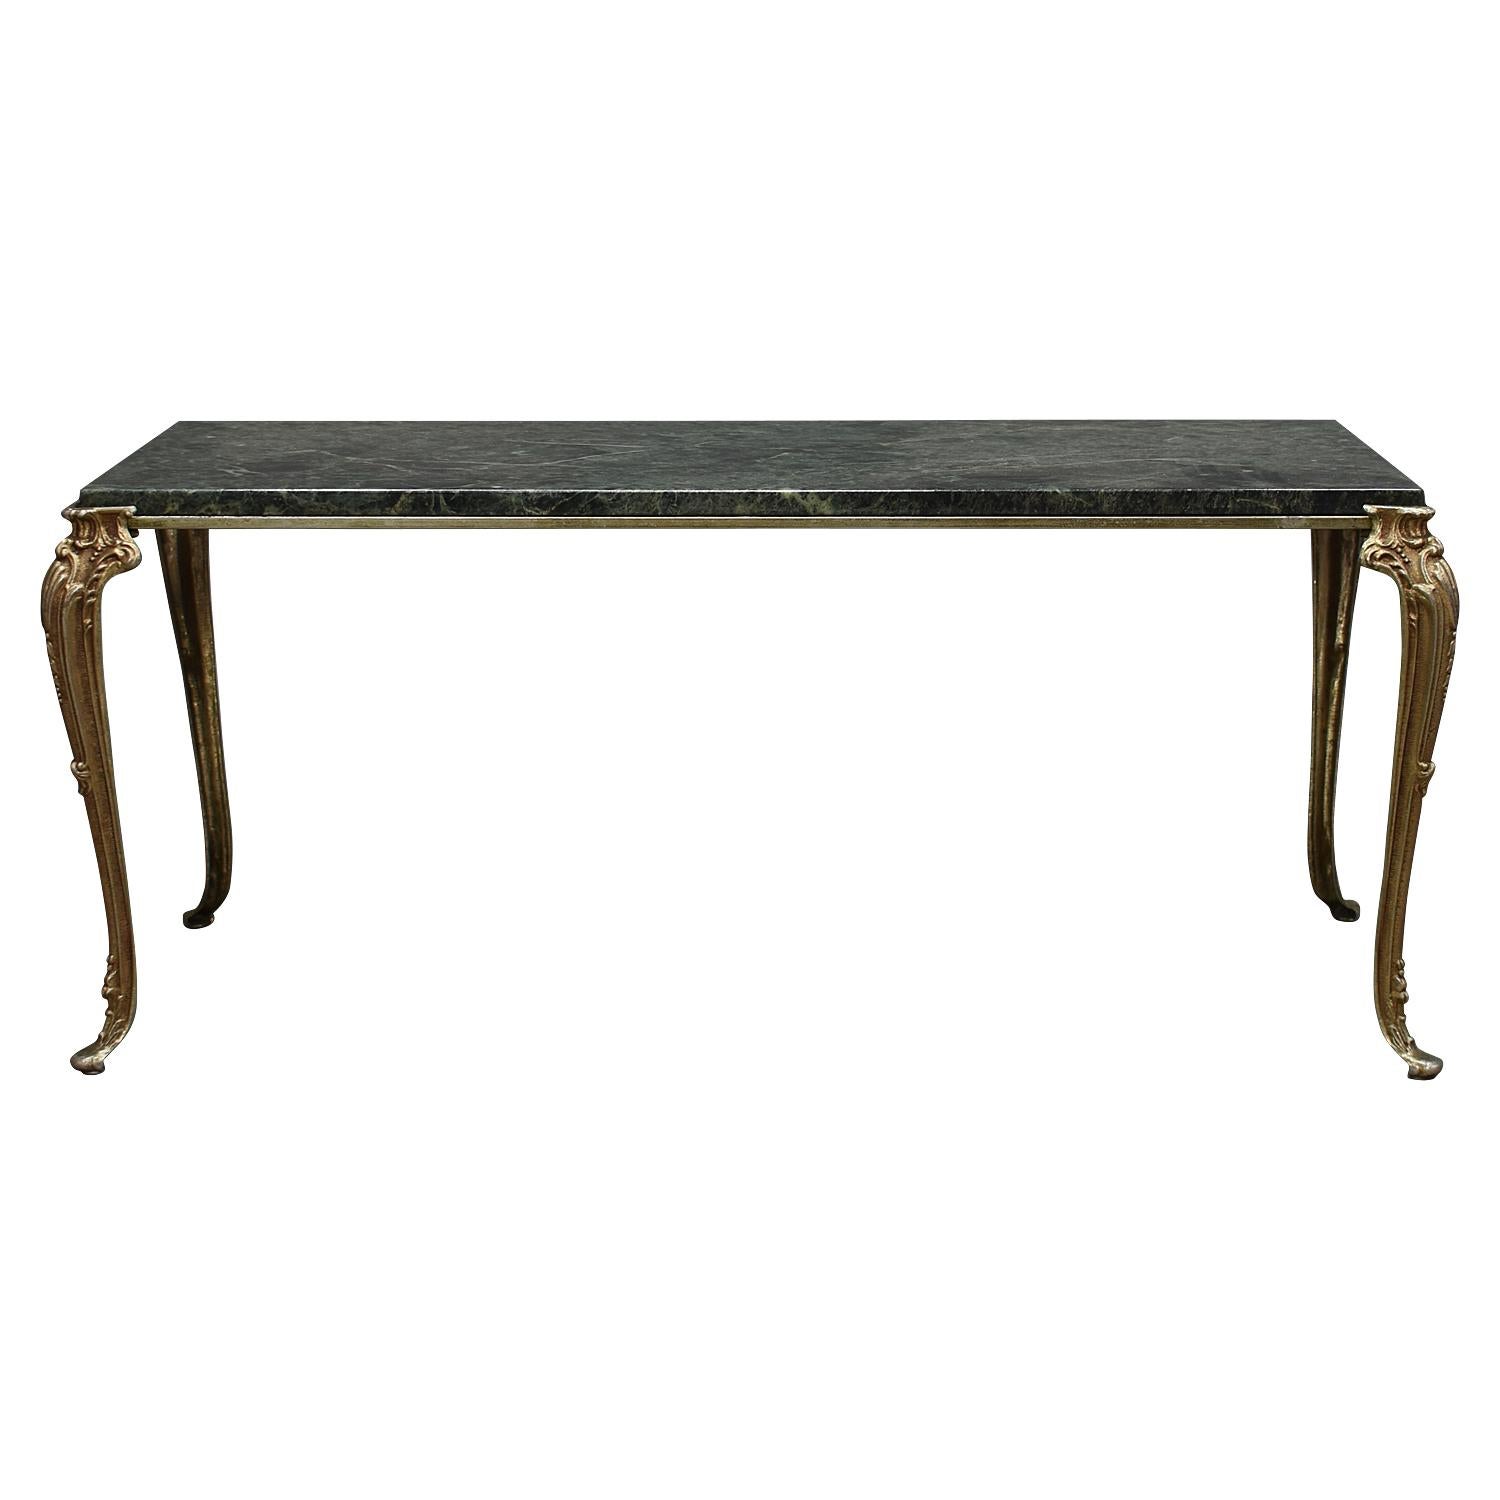 Great-Gatsby baroque coffee table with gorgeous green marble top and brass base.

Designer: Unknown

Manufacturer: Unknown

Country: France or Italy

Model: Coffee table

Material: Marble / brass

Size in cm: 105 x 51 x 45